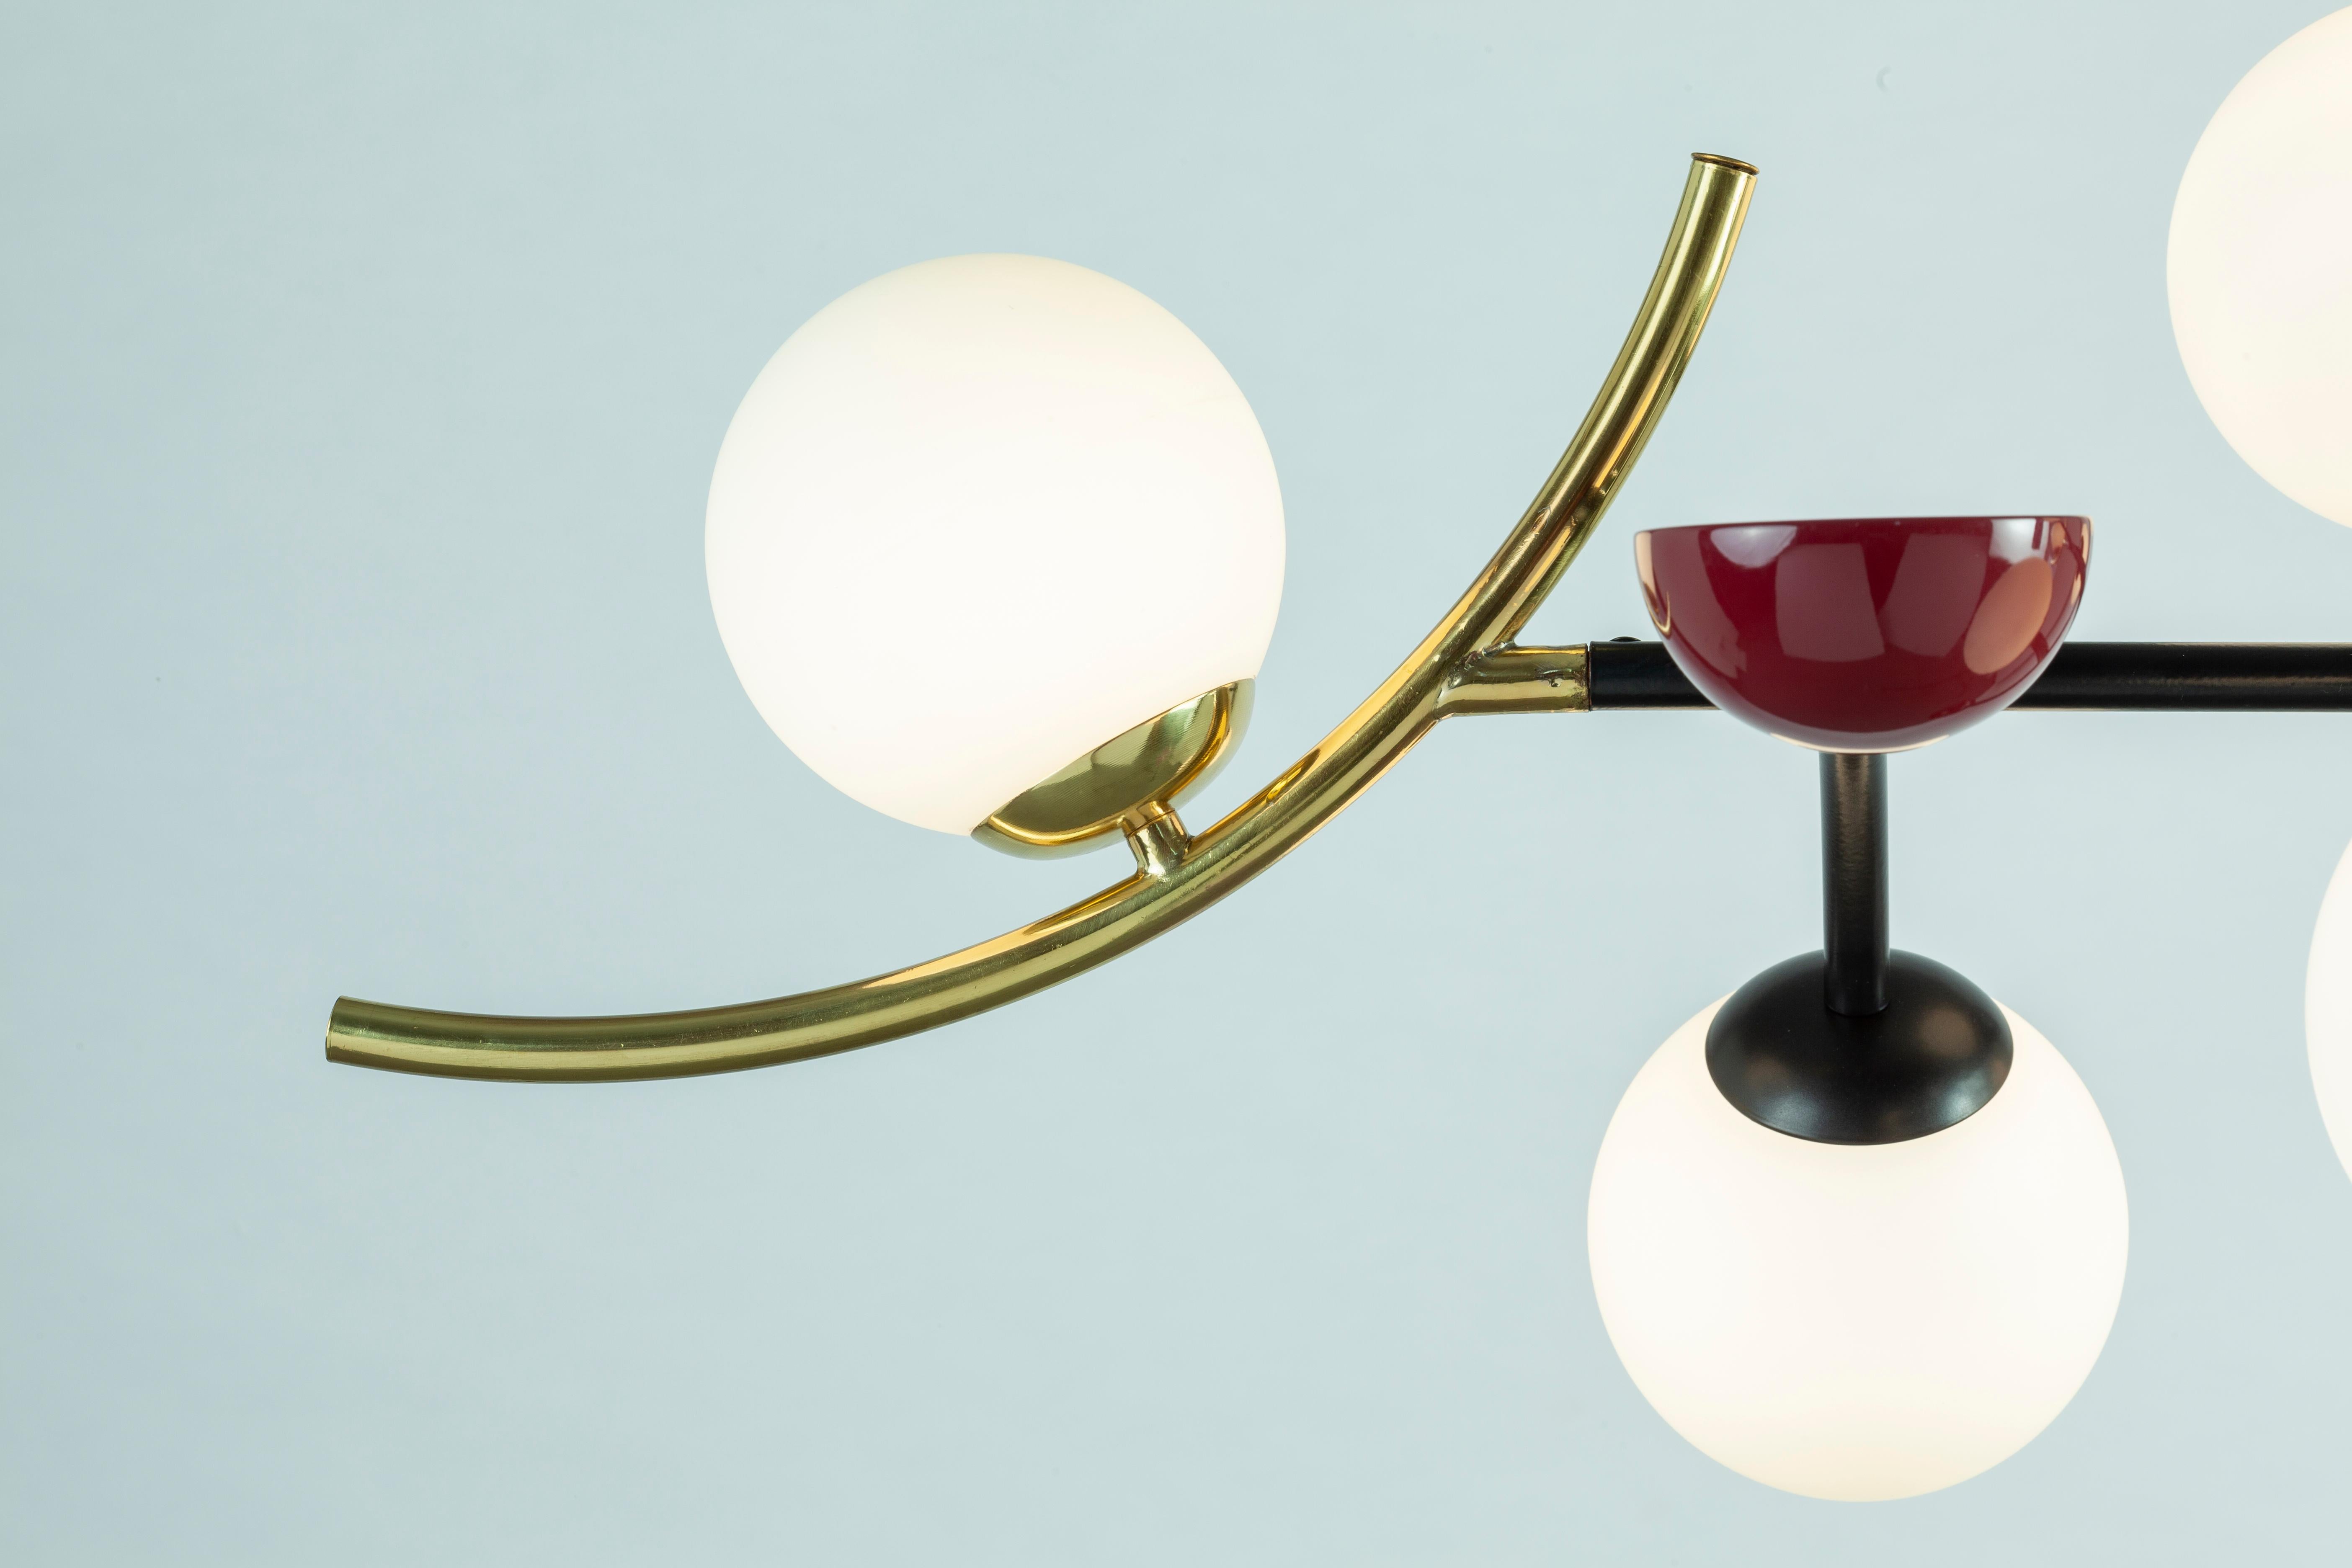 Part ambient light, part artwork, Helio I pendant lamp will highlight any space in all the right ways thanks to its frosted glass globe and sleek brass details. Made to order and color customizable.

A collection that is raw and expressive yet